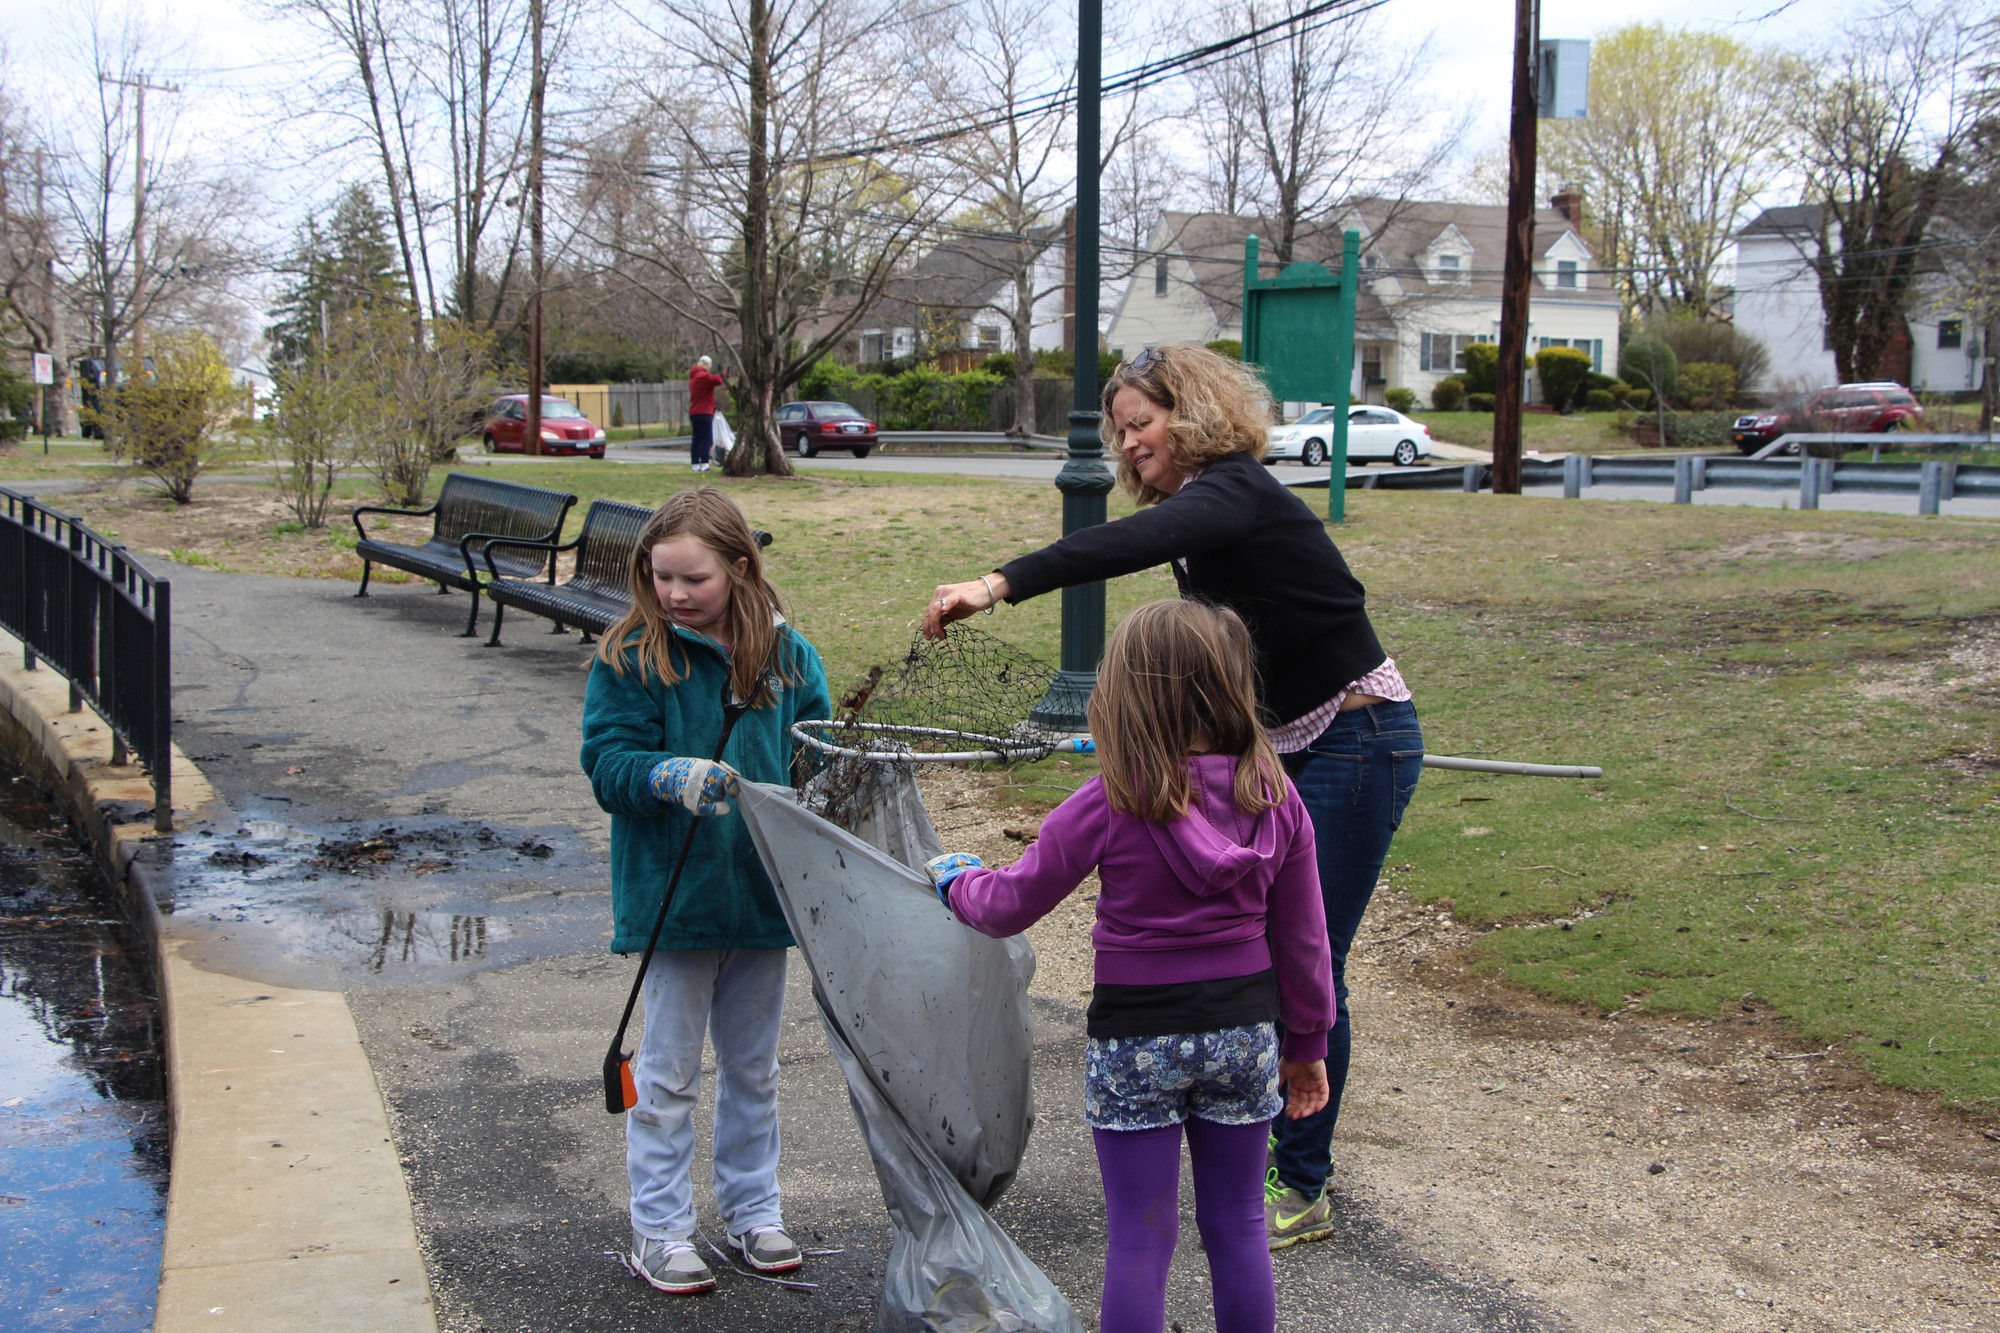 Nassau County Leg. Laura Curran, with her daughters Molly, right, and Julie, helped scoop out some debris from the Silver Lake.